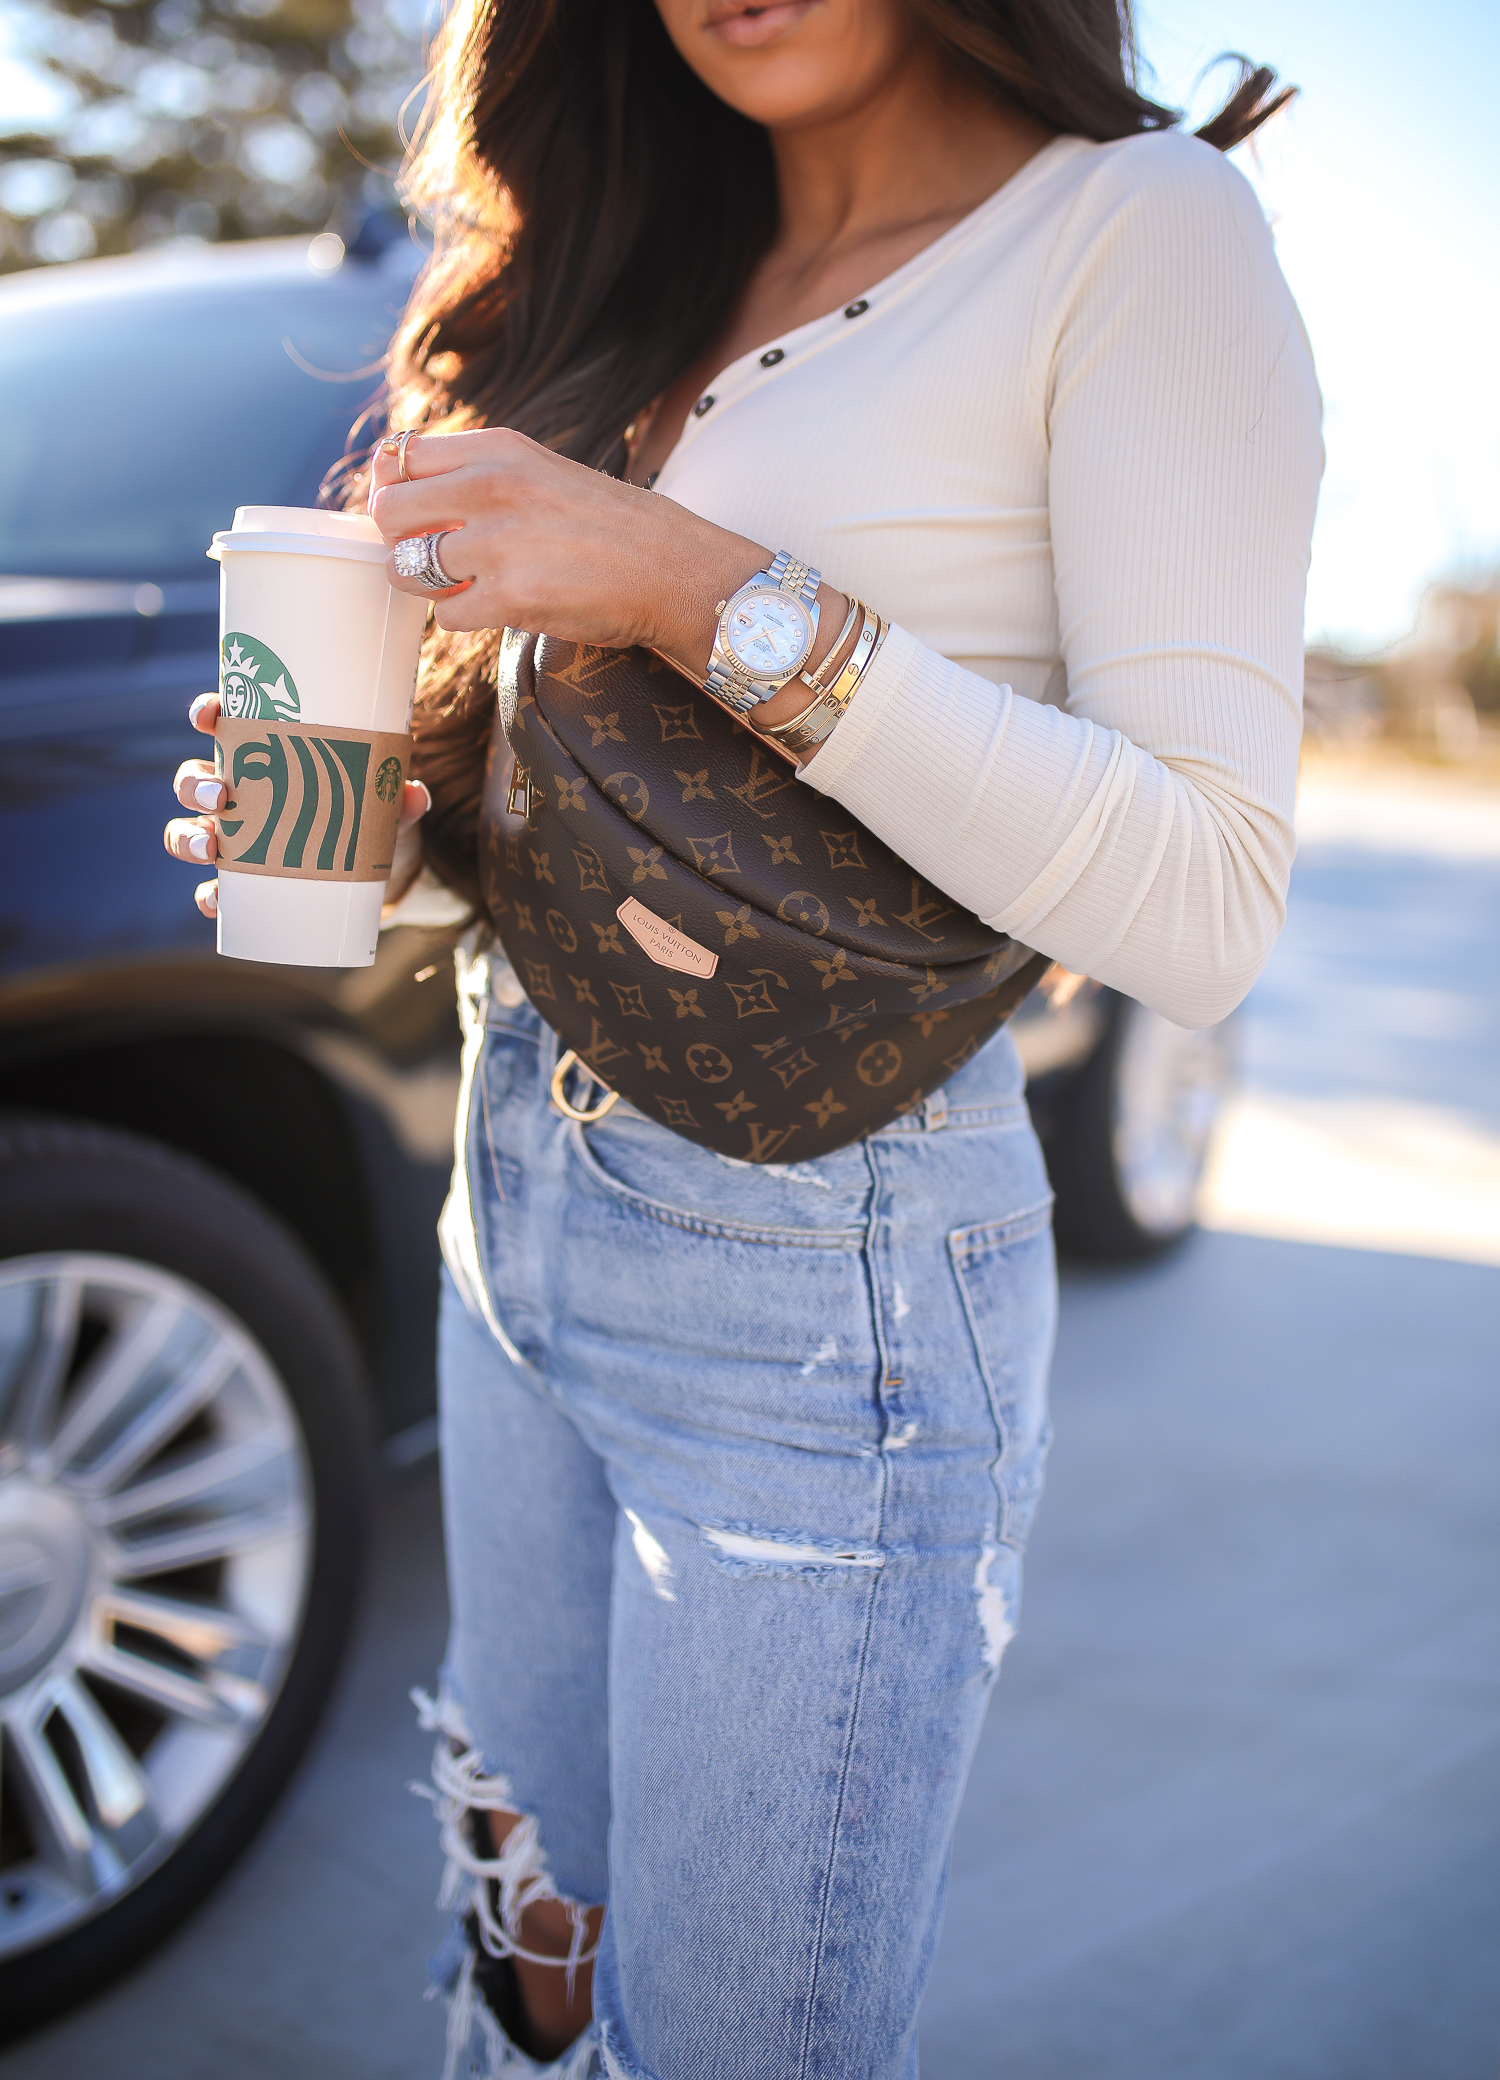 AGOLDE 90s fit high rise jeans review, Louis Vuitton bum bum fanny pack bag, louis vuitton bum bum fanny review pinterest outfit idea, emily gemma, popular fashion bloggers US instagrammers-6 | Agolde Jeans and My Main #OOTD by popular Oklahoma fashion blog, The Sweetest Thing: image of a woman wearing Oliver Top Privacy Please brand: Privacy Please, 90s High Rise Loose Fit AGOLDE brand: AGOLDE, GOLDEN GOOSE Superstar Low-Top Sneakers, Nordstrom 55mm Cat Eye Sunglasses GUCCI, Louis Vuitton Bum Bum fanny pack, Nordstrom Lip Cheat Lip Liner CHARLOTTE TILBURY, Nordstrom Hot Lips Lipstick CHARLOTTE TILBURY, and Nordstrom Gloss Luxe Moisturizing Lipgloss TOM FORD.